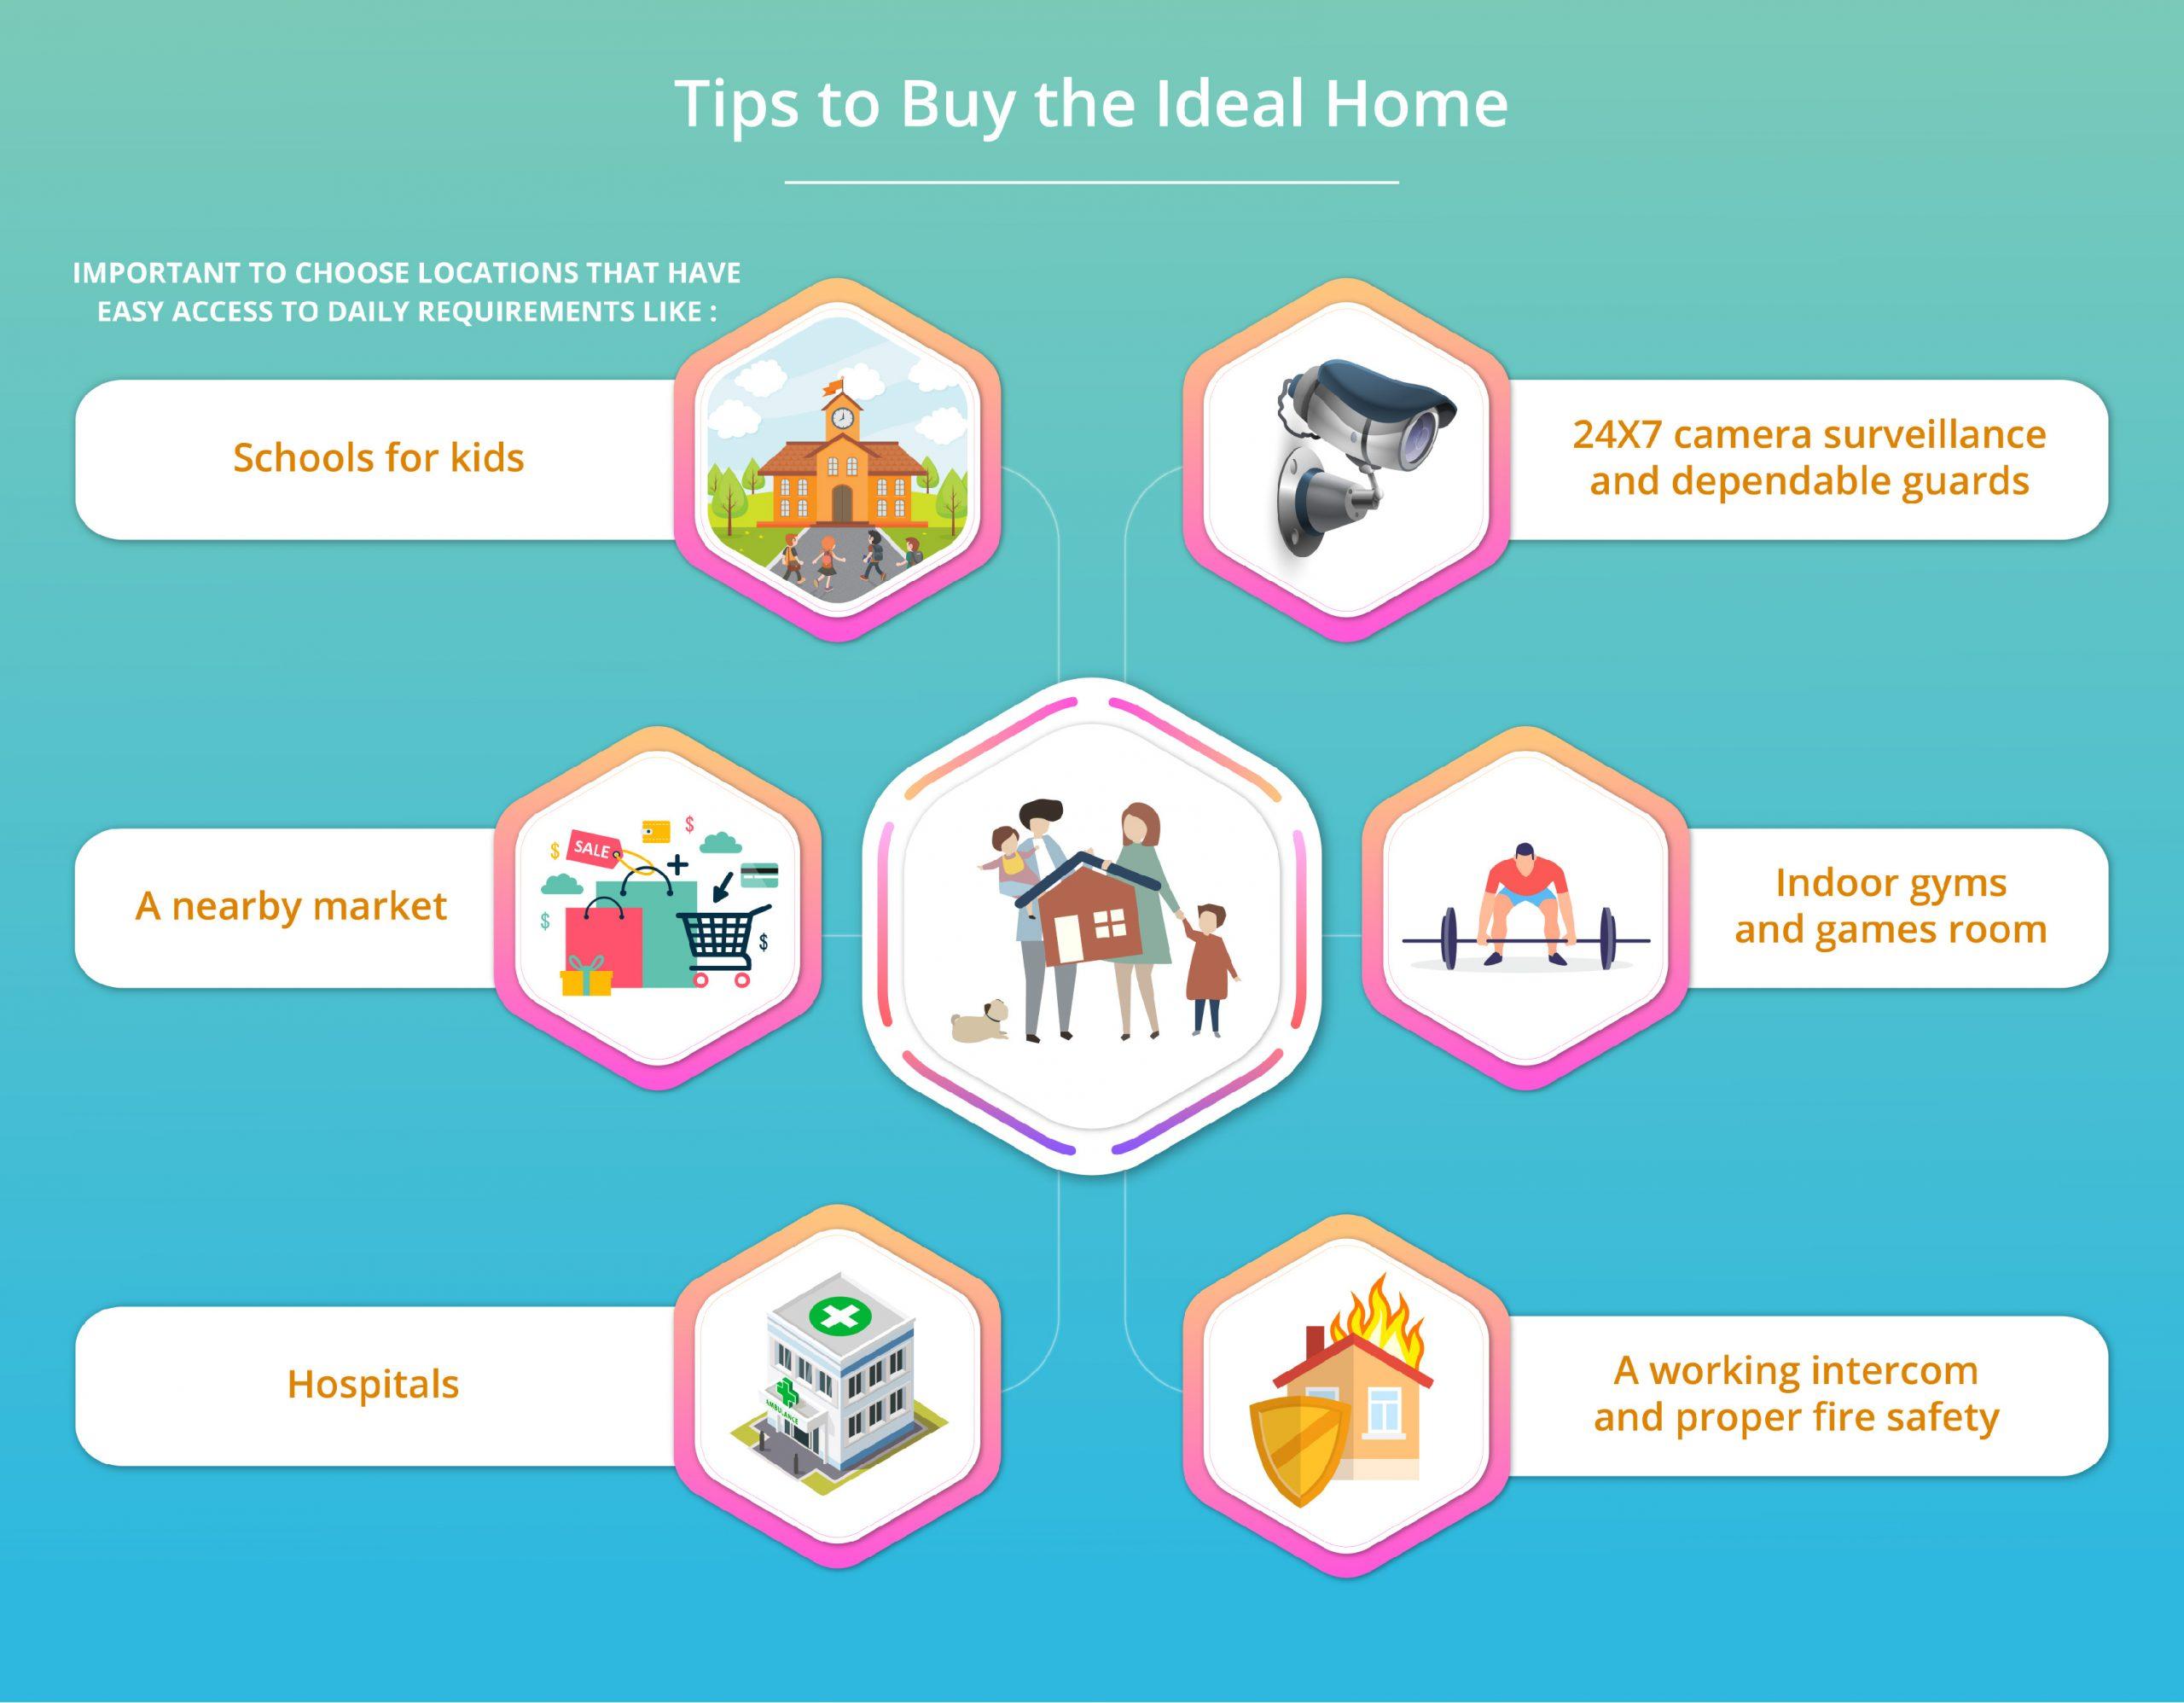 Tips to Buy the Ideal Home